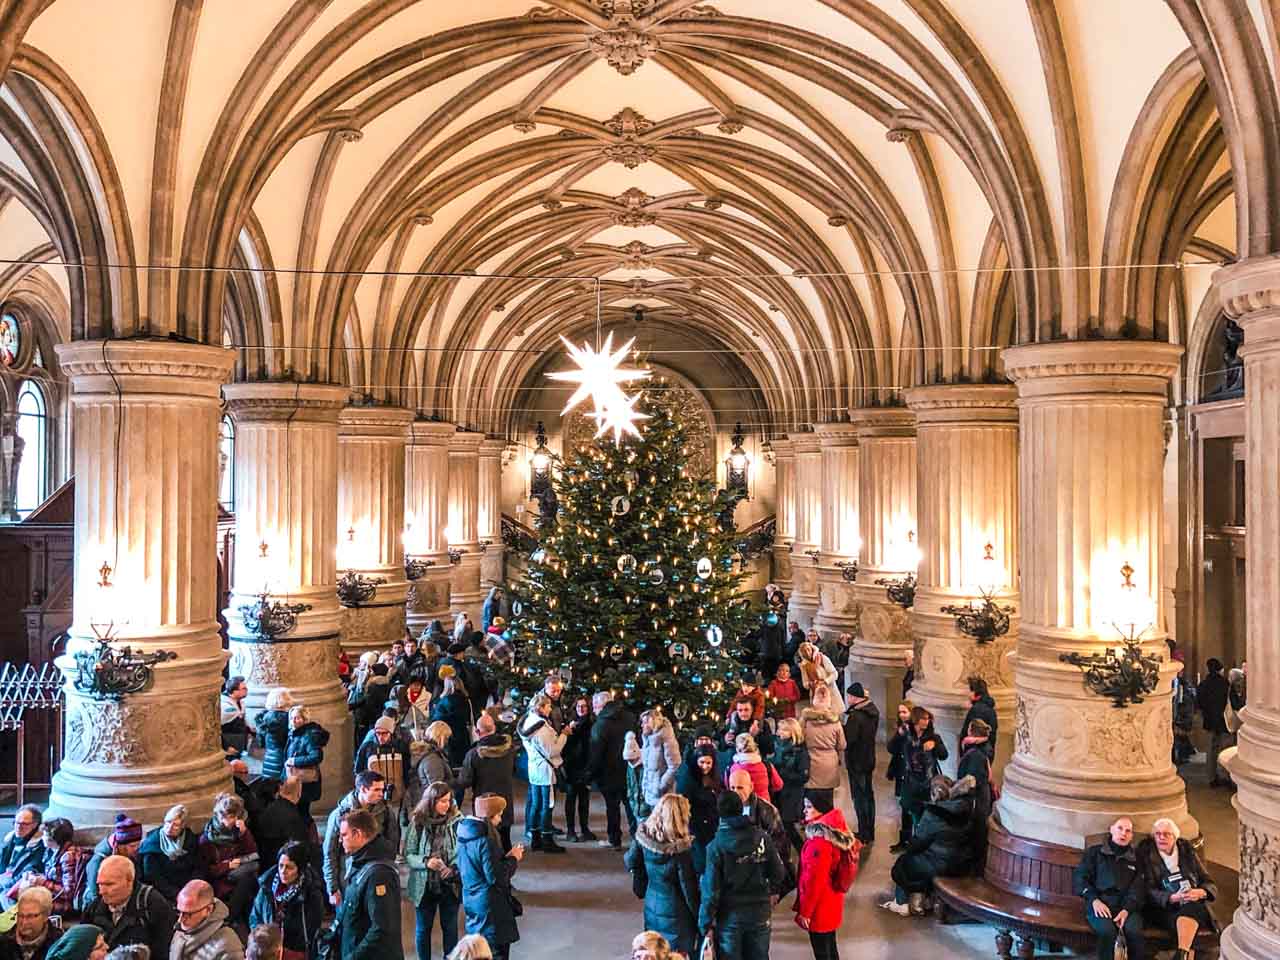 A Christmas tree inside the City Hall building in Hamburg